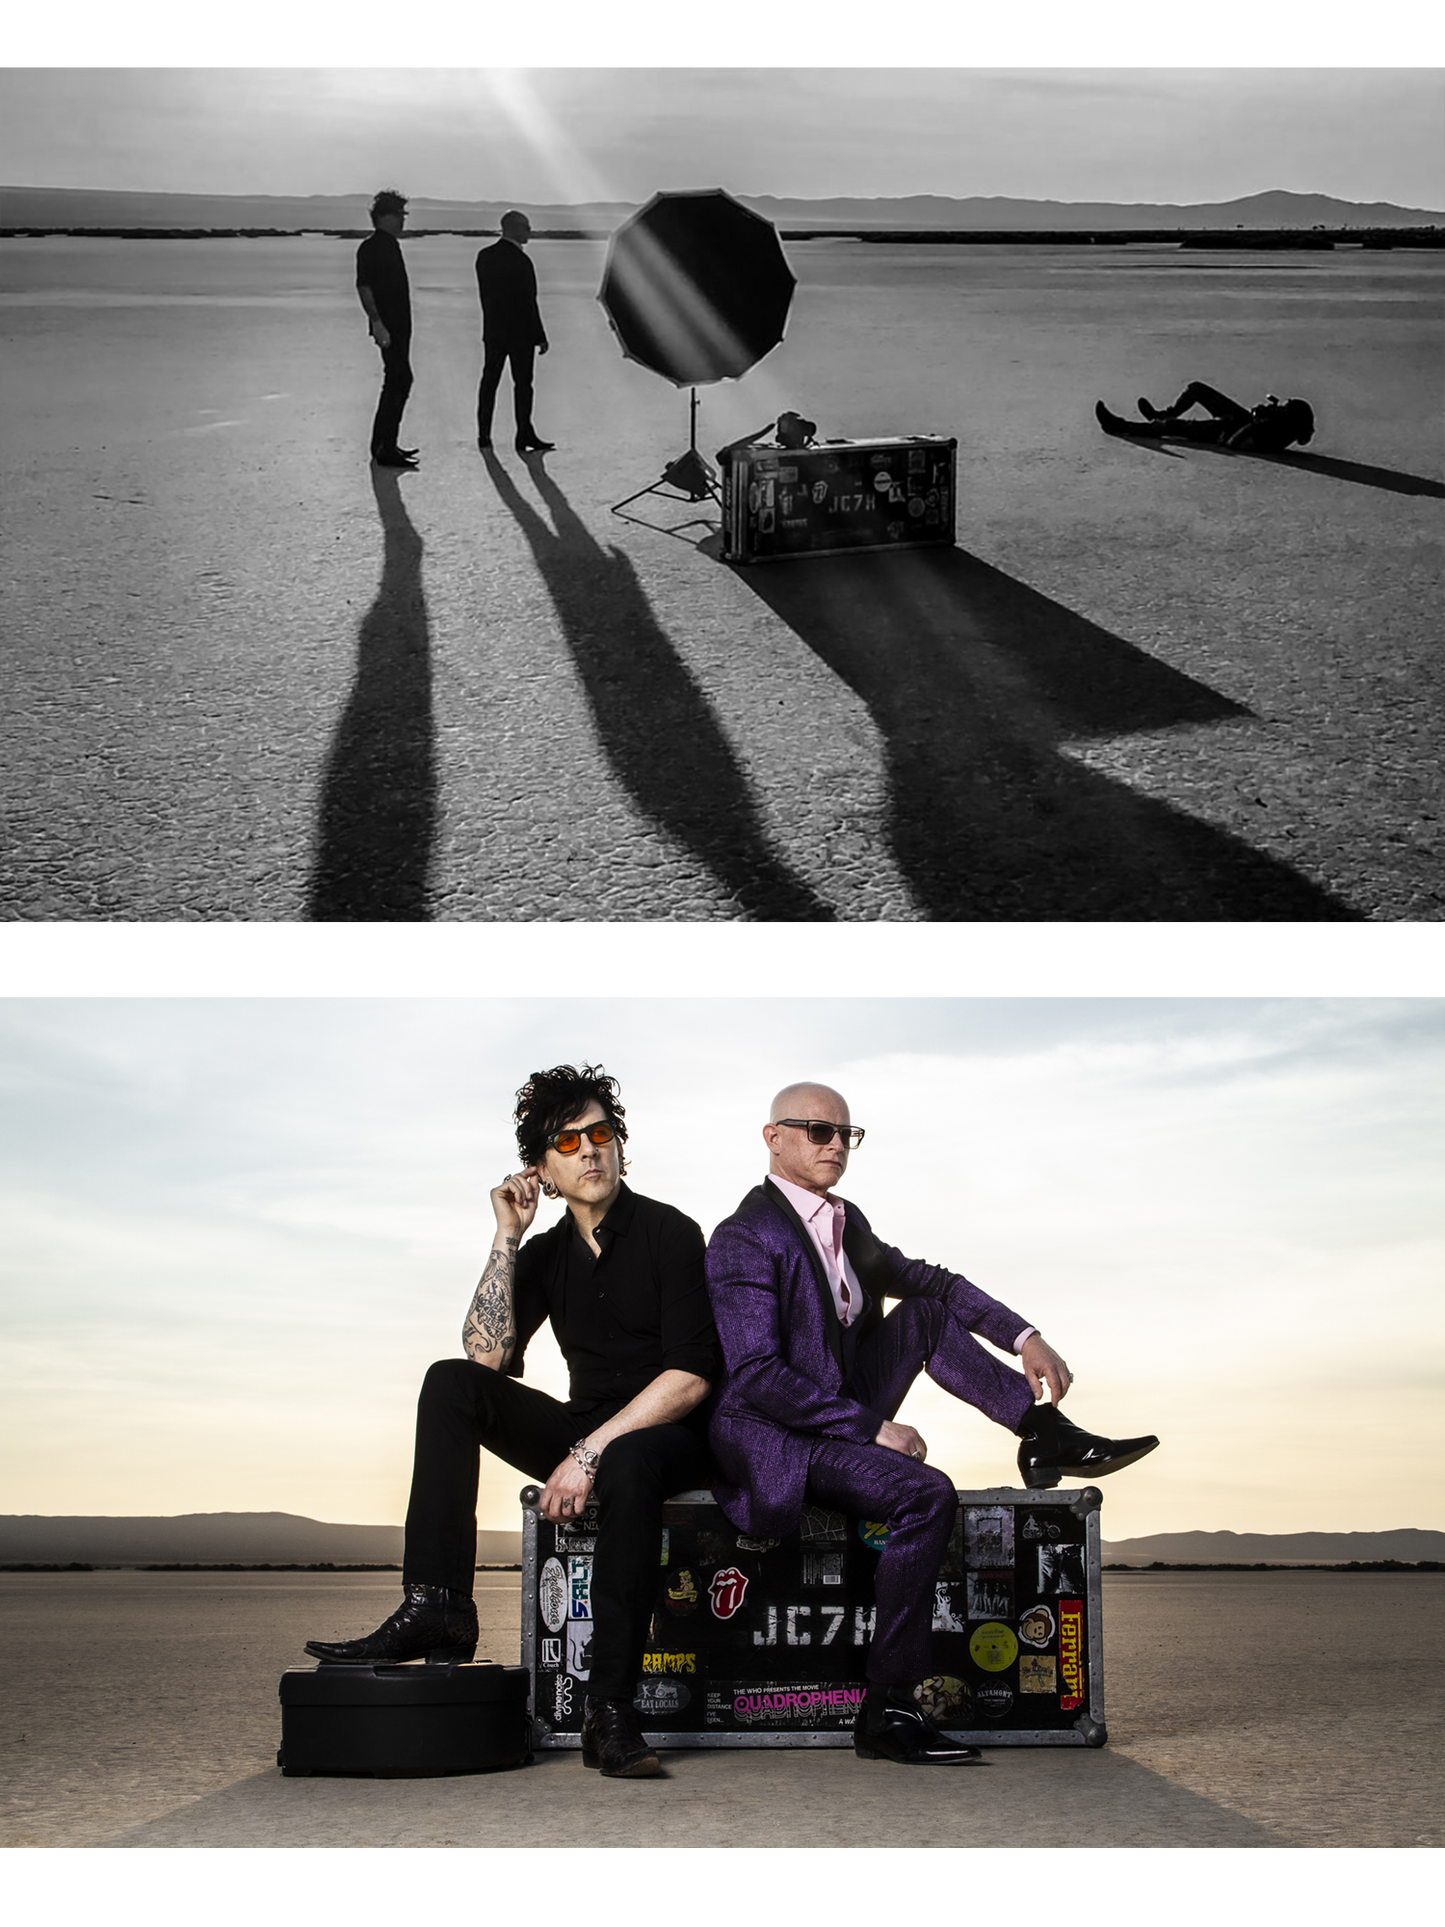 Fine art portrait photography shoot 7Horse duo in desert sitting on guitar case in color black and white behind the scenes photo with Mark Maryanovich placed above